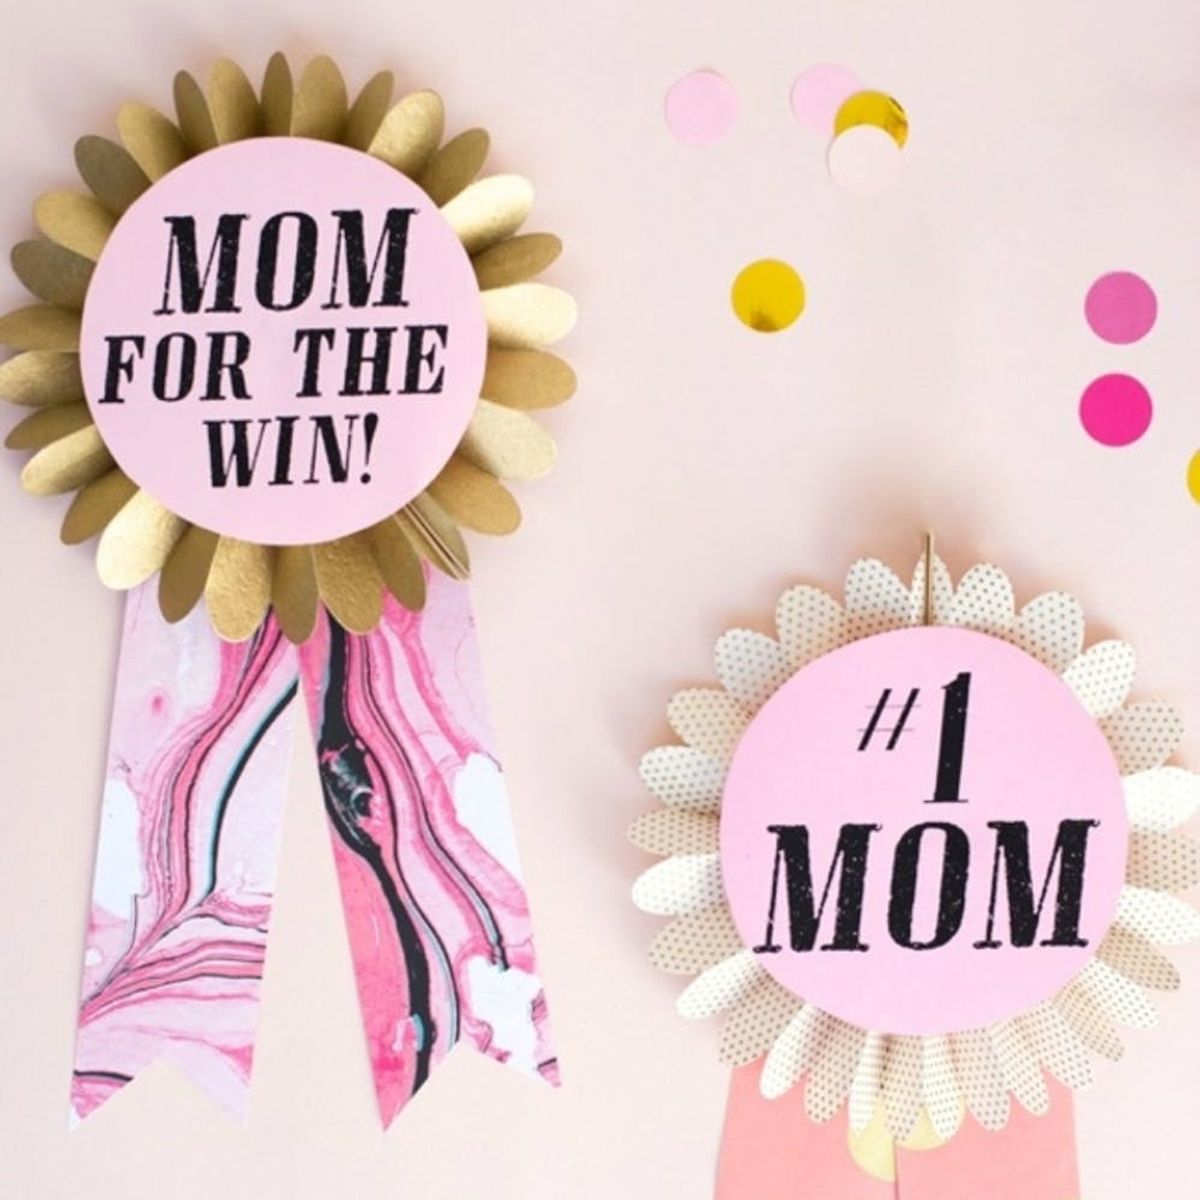 17 Mother’s Day Brunch Ideas to Make Your Mama Proud